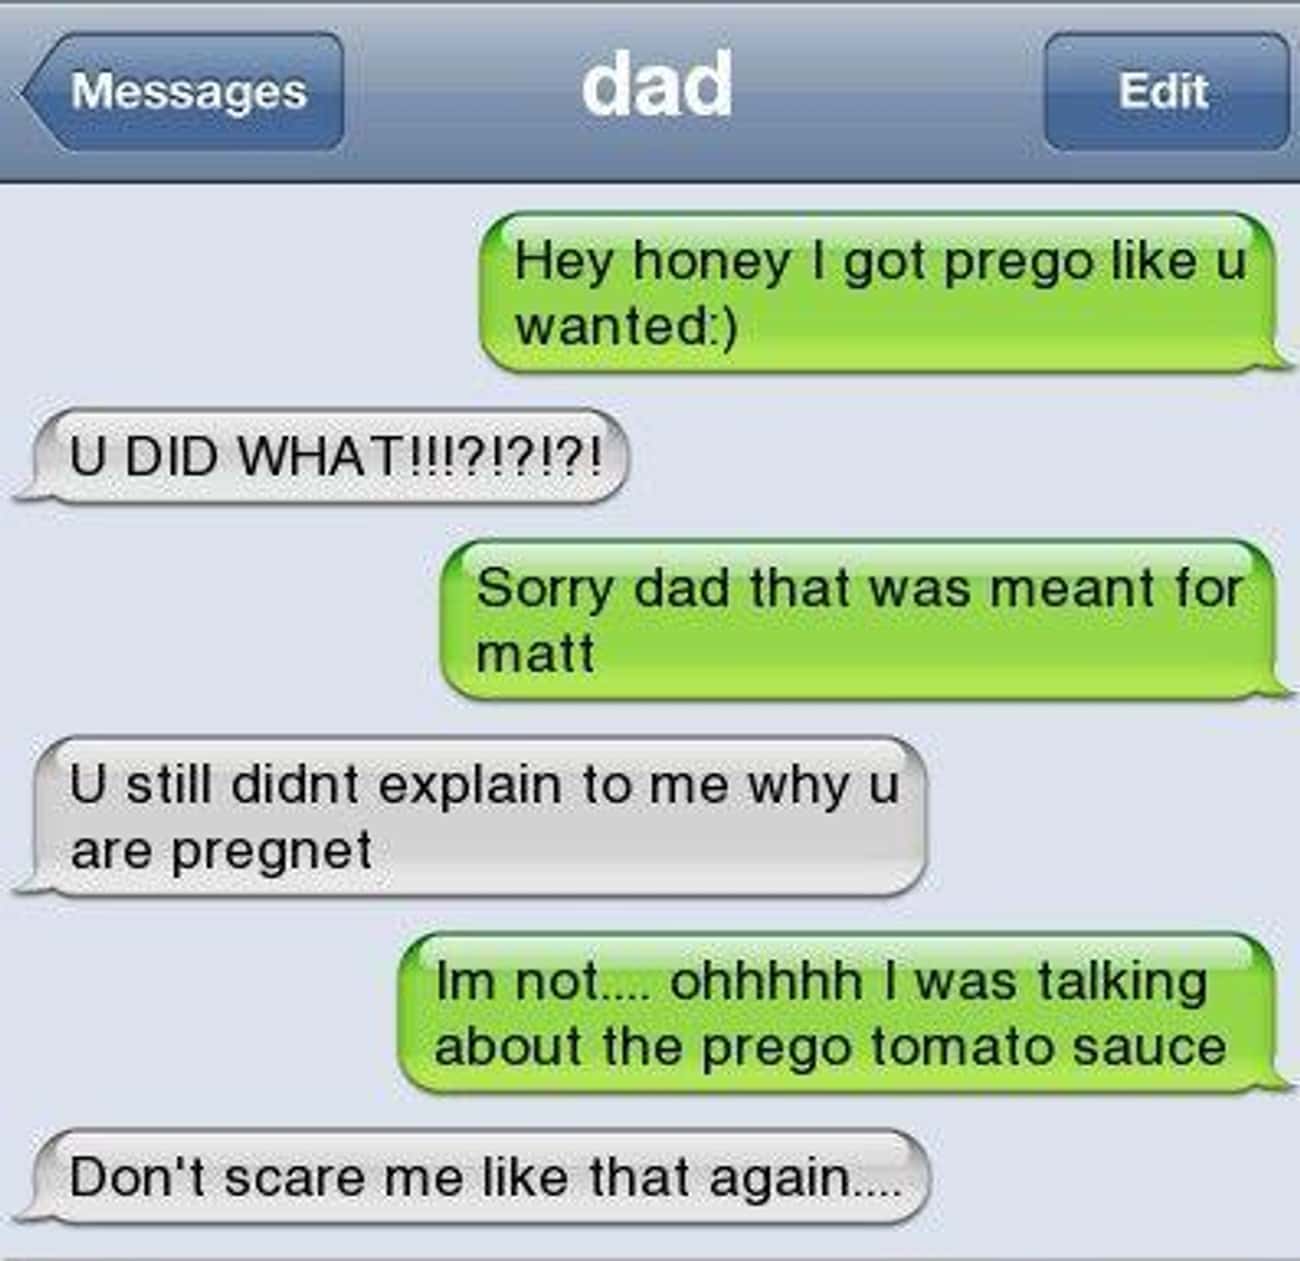 Theirs send message. Funny messages. Unsent messages to Lera. Hey,dad. Sorry. Funny text messages.